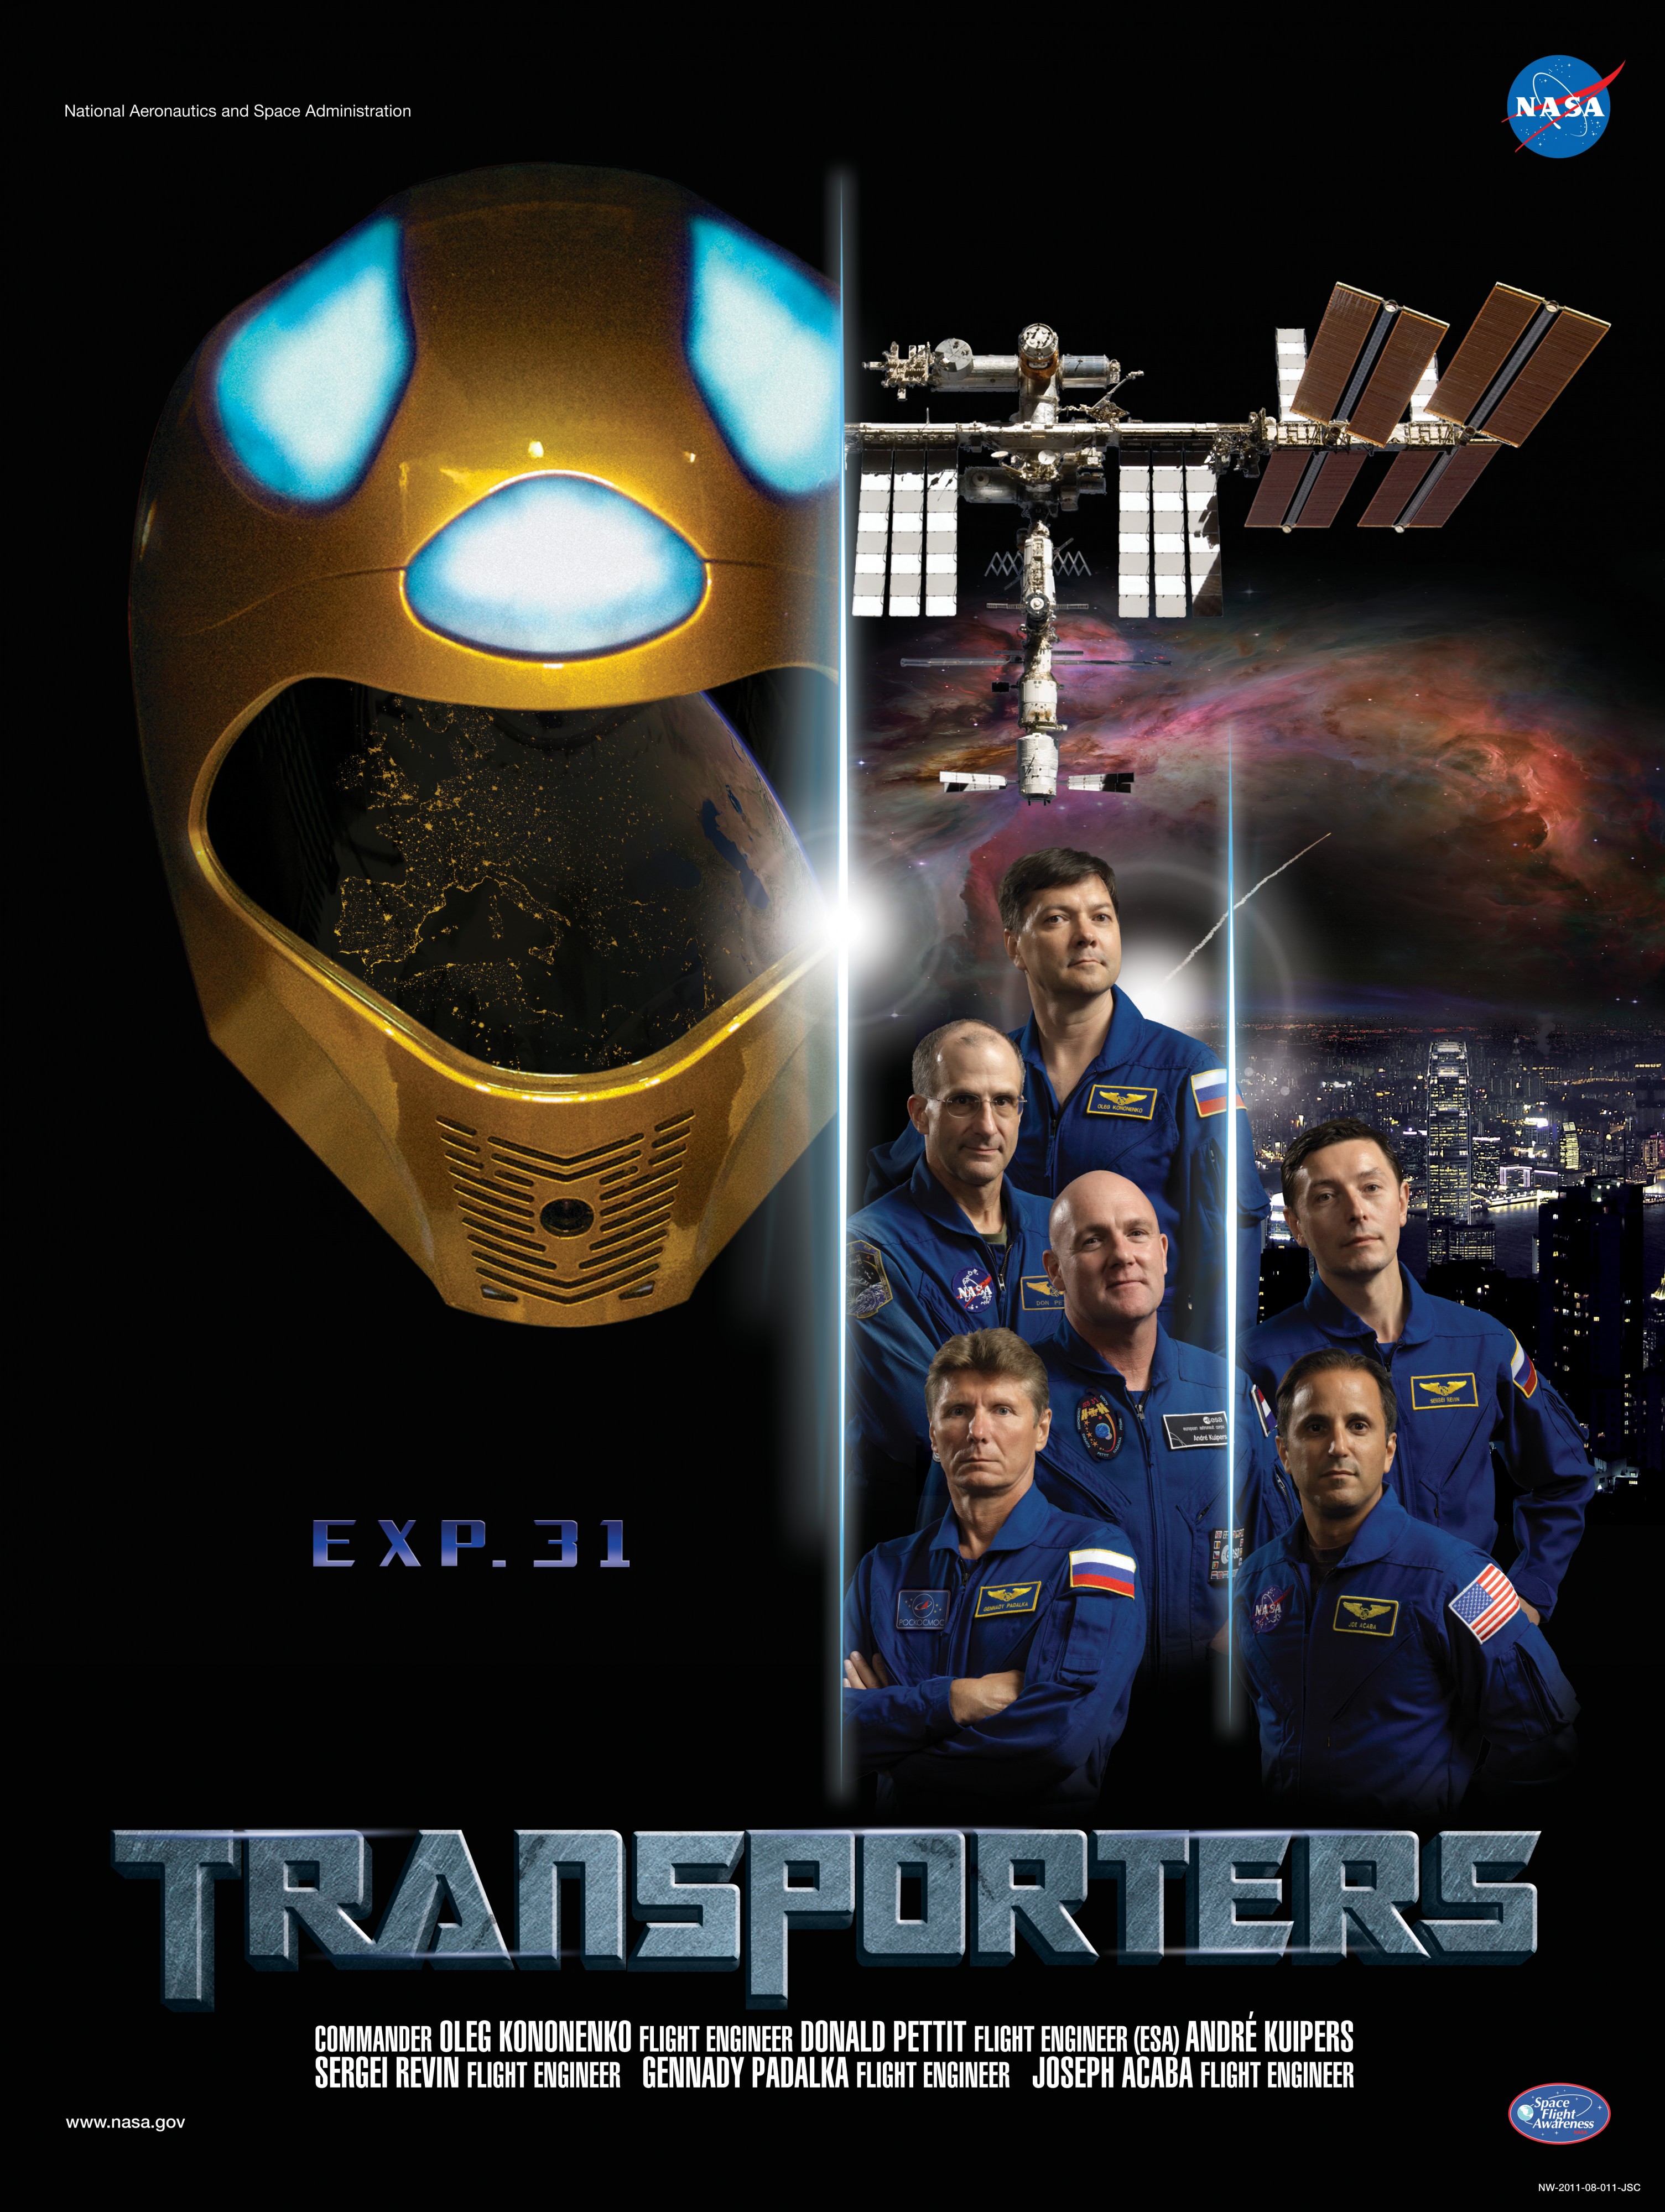 Expedition 31 TRANSPORTERS crew poster